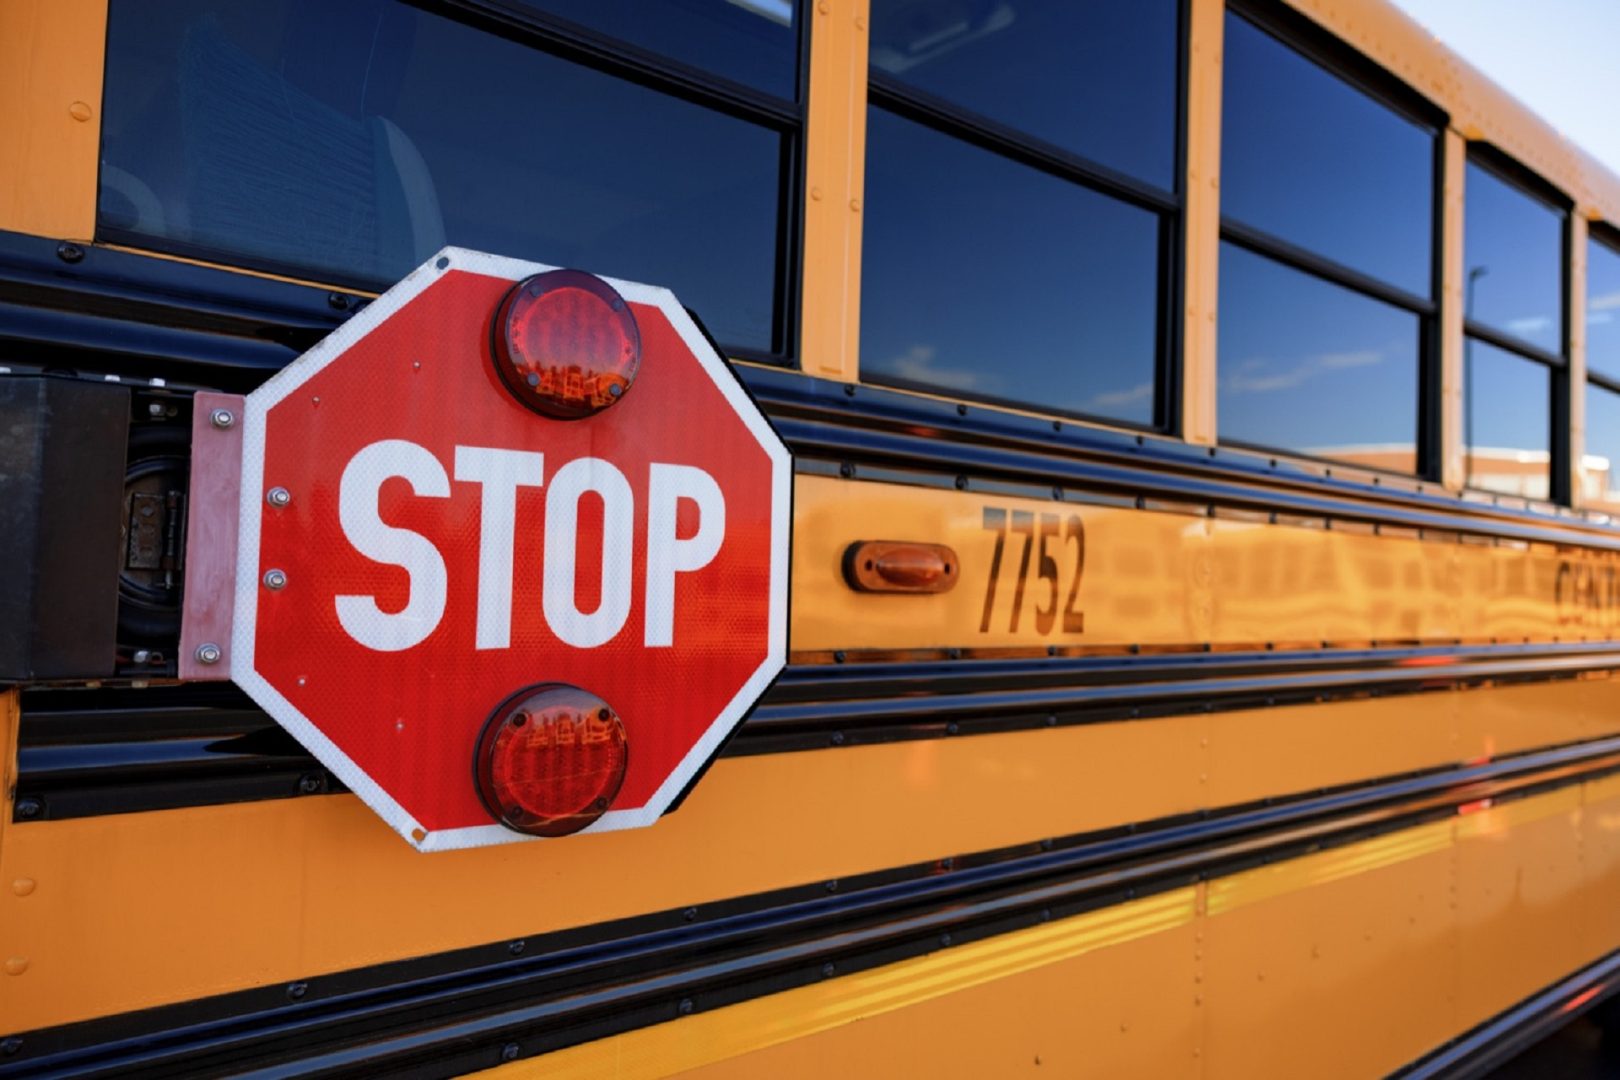 School busses are pictured during a press conference, which encouraged interested individuals to obtain Commercial Driver’s License to address bus driver shortage in Pennsylvania, on Thursday, October 21, 2021.